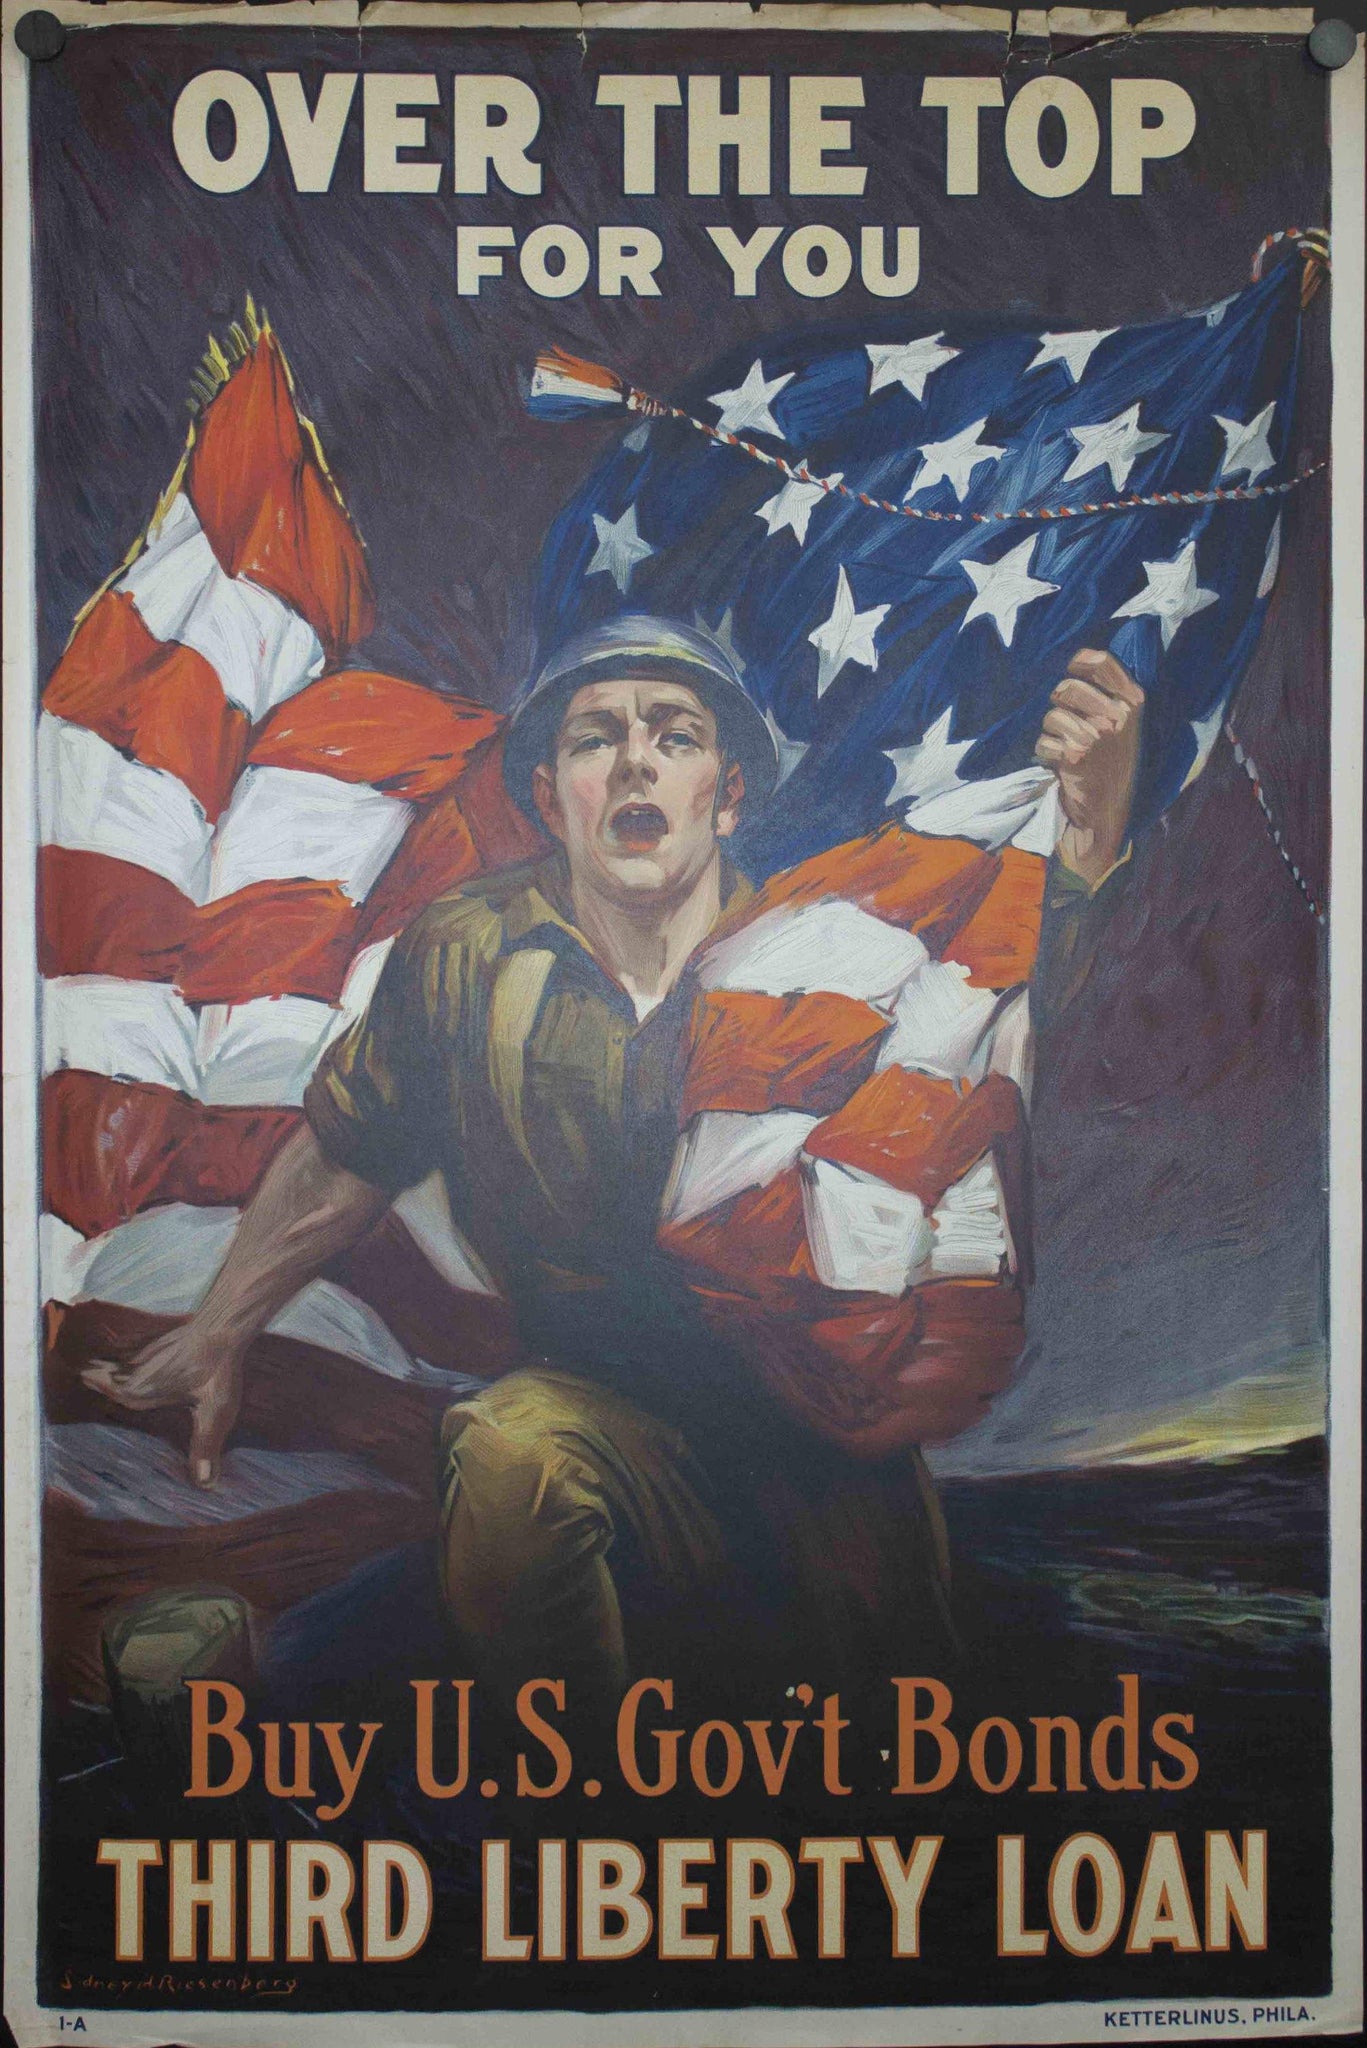 1918 Over The Top For You Third Liberty Loan by Sidney H. Riesenberg - Golden Age Posters